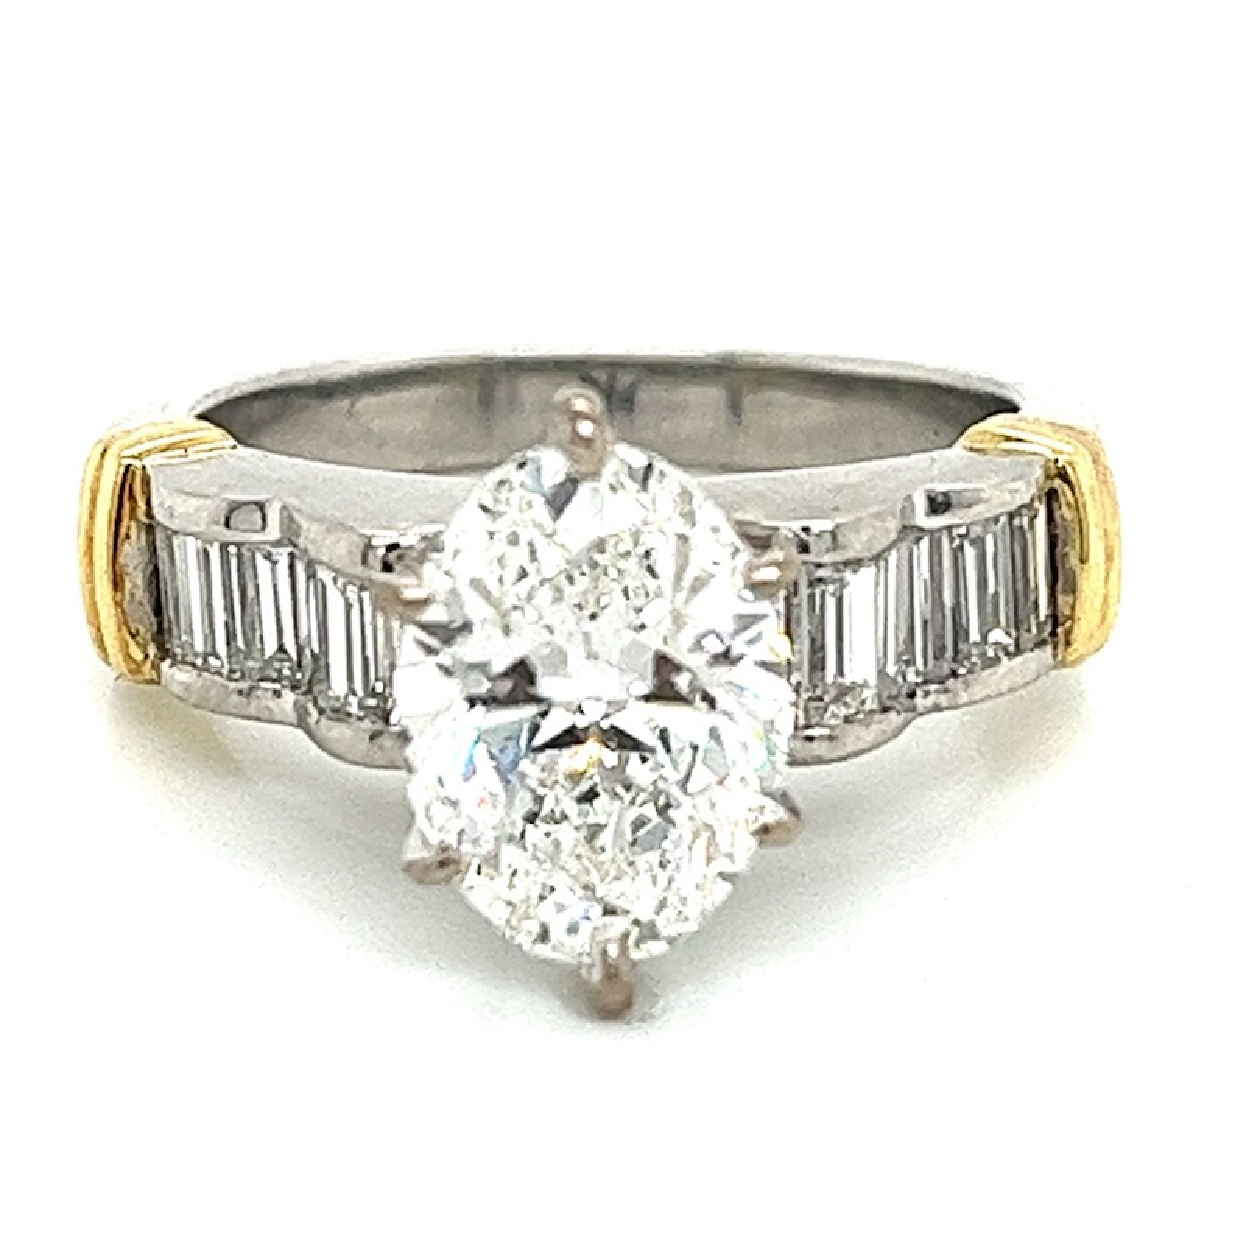 Platnium Oval Diamond Engagement Ring with 18K Gold and Baguette Diamond Accents

2.71ct Lab Grown Oval Diamond Center G/VVS2
GIA Grading Available 

Size 8.5